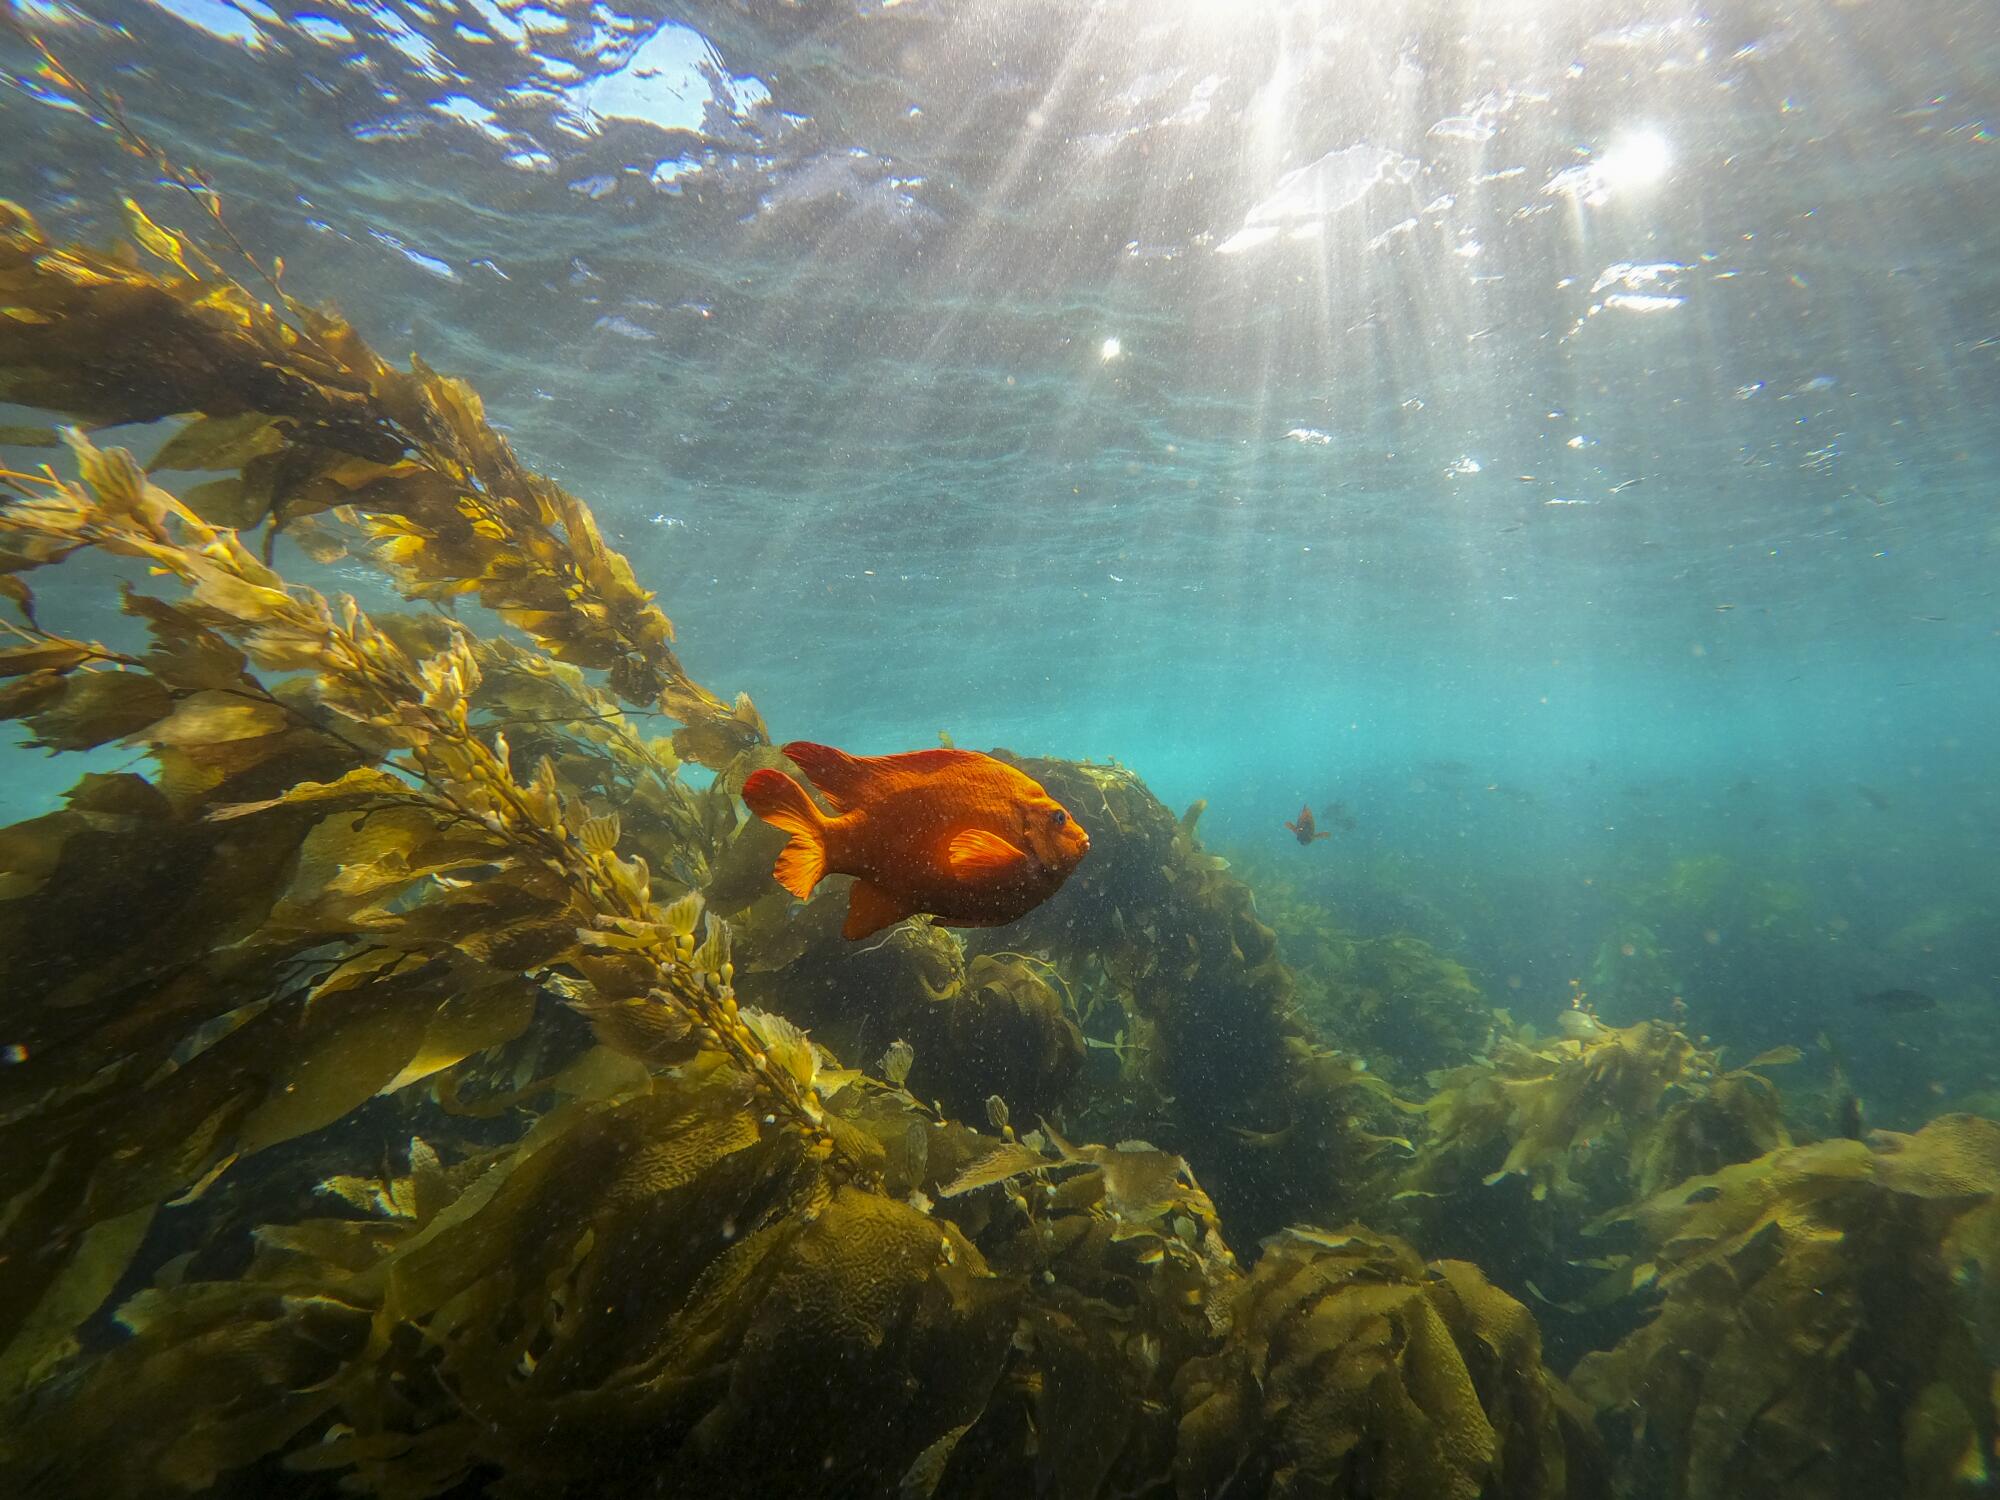 An orange fish swims in shallow waters.